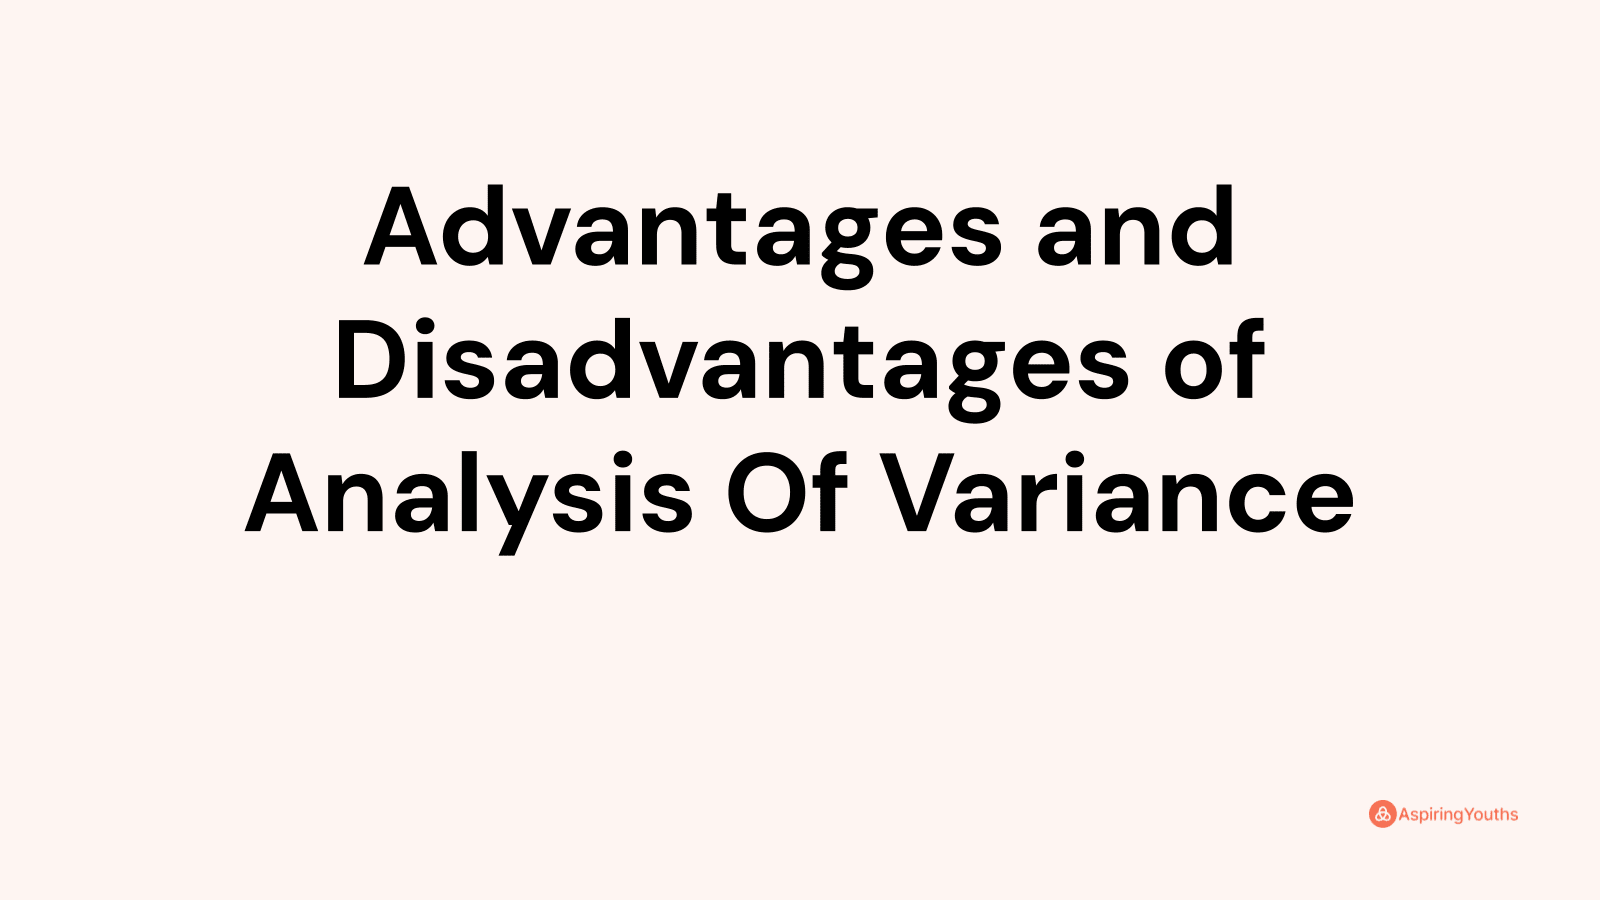 Advantages and disadvantages of Analysis Of Variance